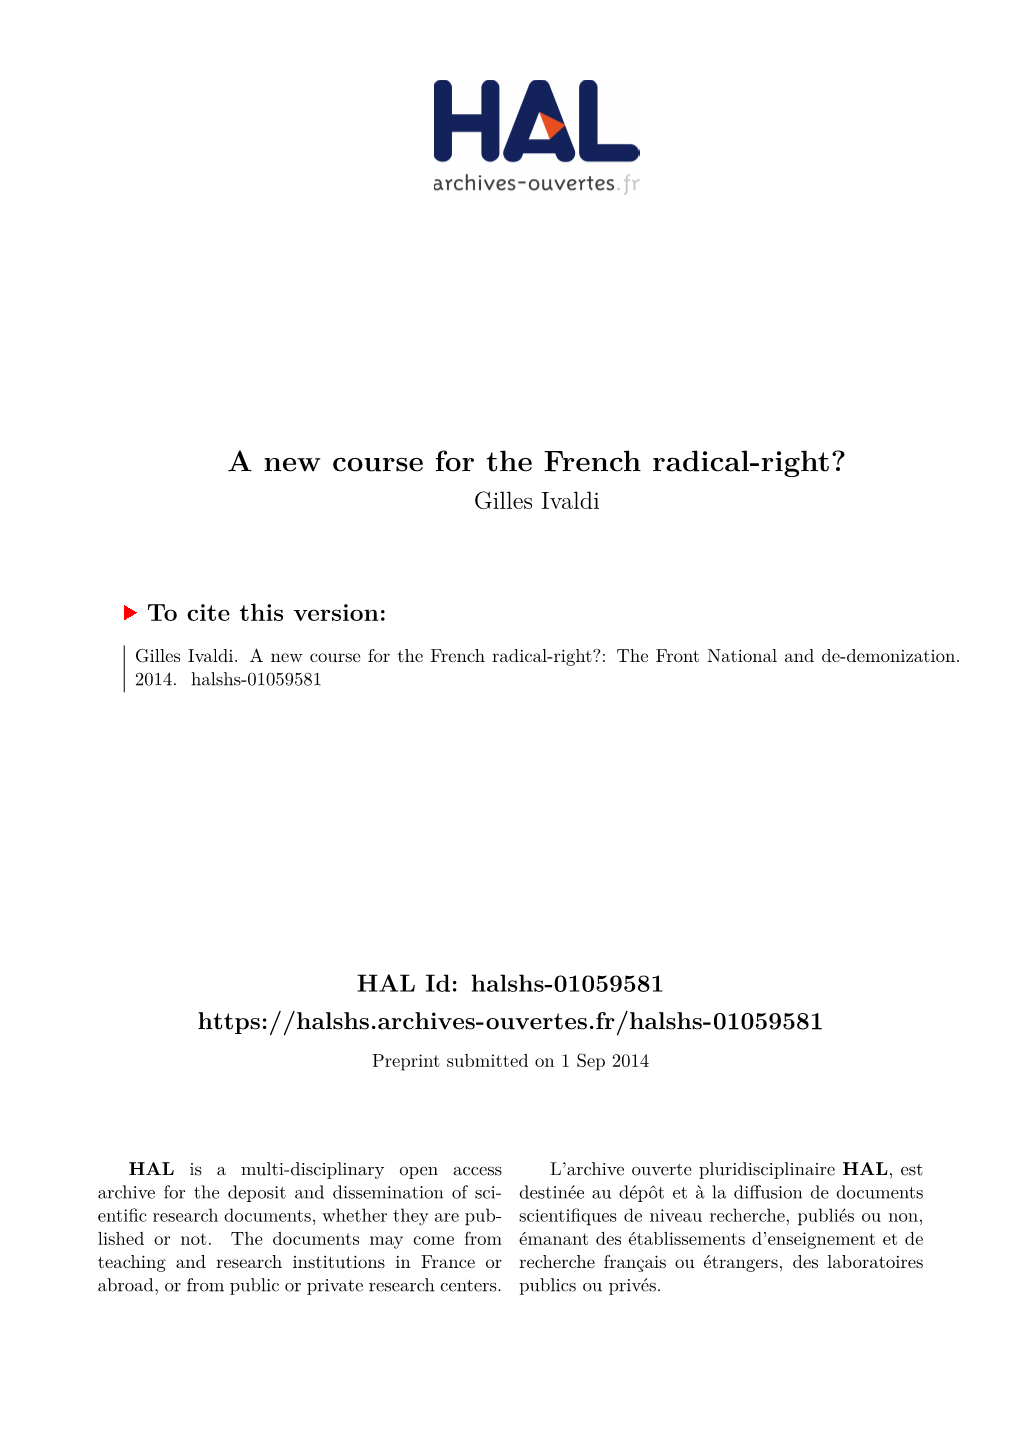 A New Course for the French Radical-Right? Gilles Ivaldi